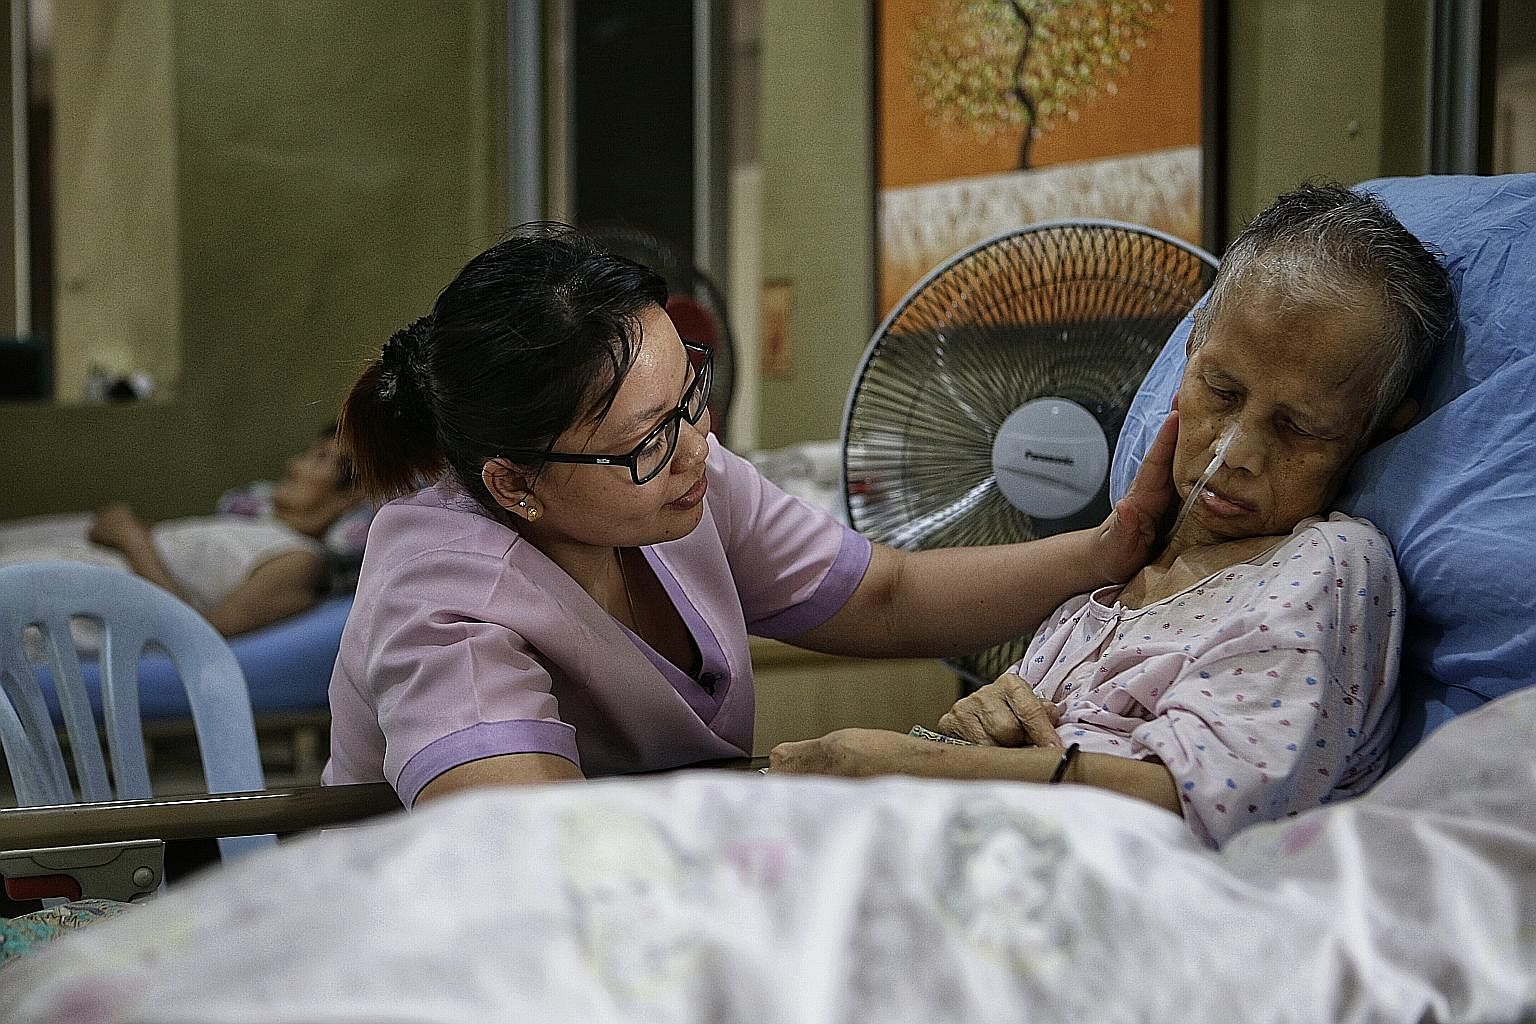 Senior nurse Liew Seenah, 30, consoling 69-year-old Madam Pungut Jumadi at Green Acres Nursing Home (below) in Johor Baru, about 20 minutes' drive from the Causeway. The owner of the home, Mr Yeo Kok Leong, is hoping to find Madam Pungut's family in 